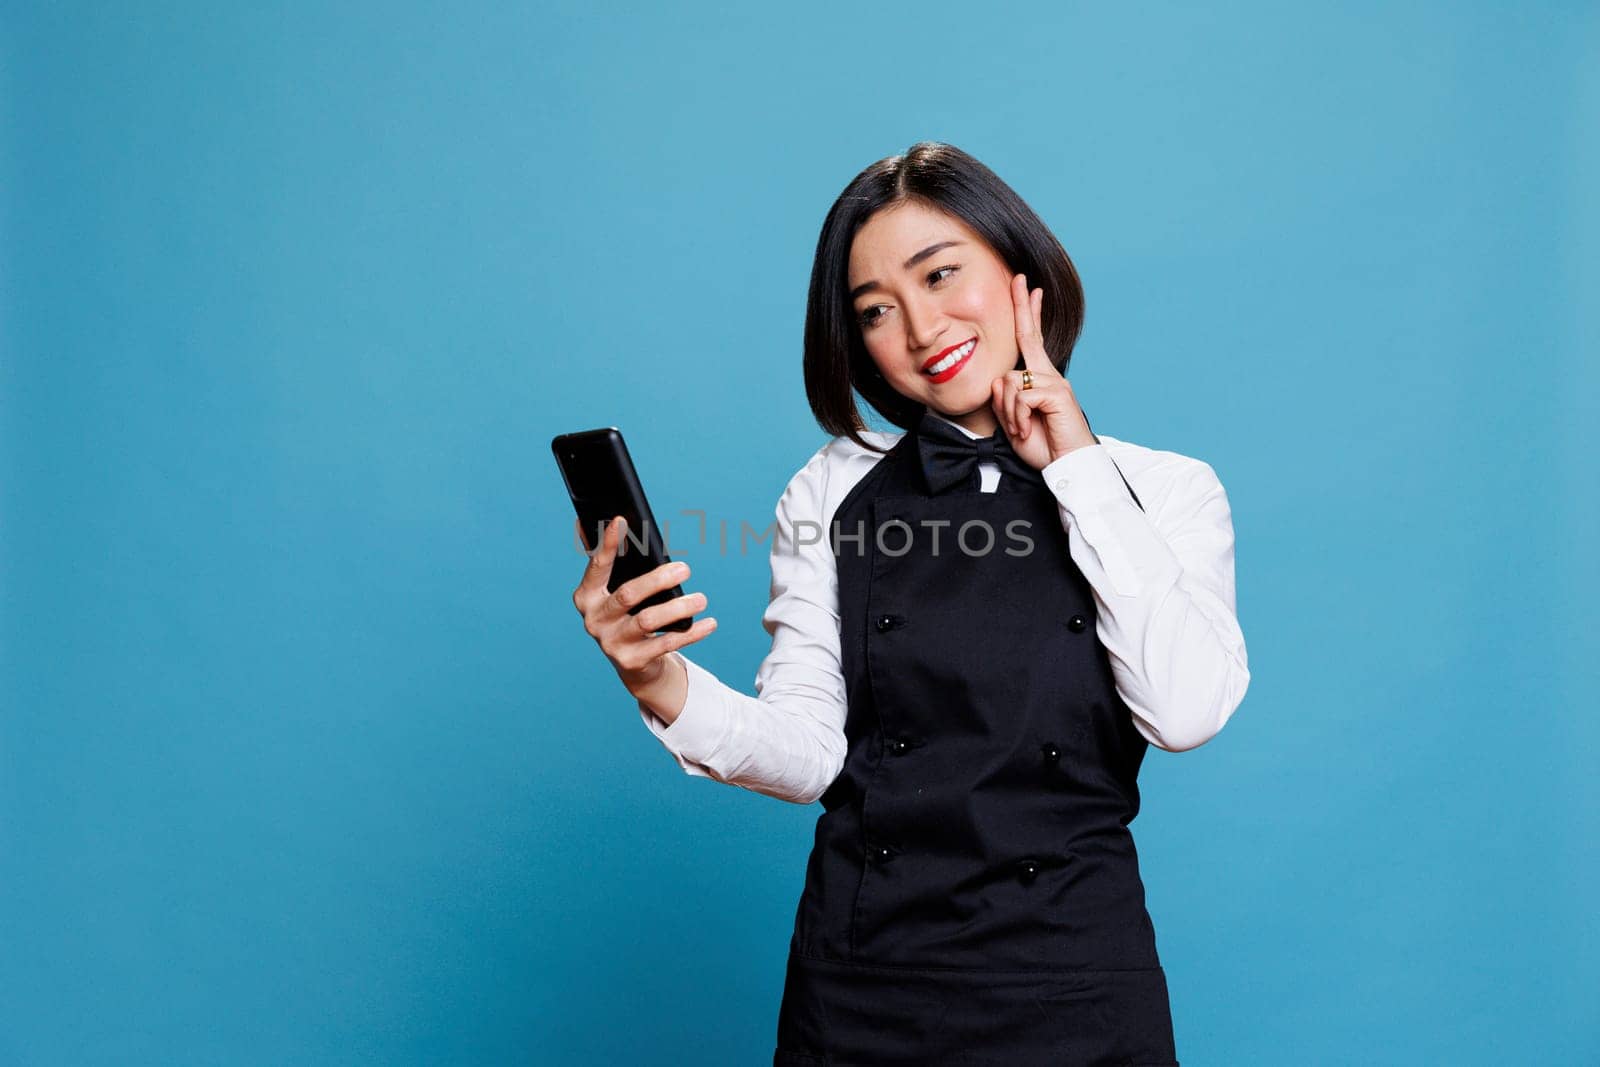 Receptionist showing peace in videocall by DCStudio